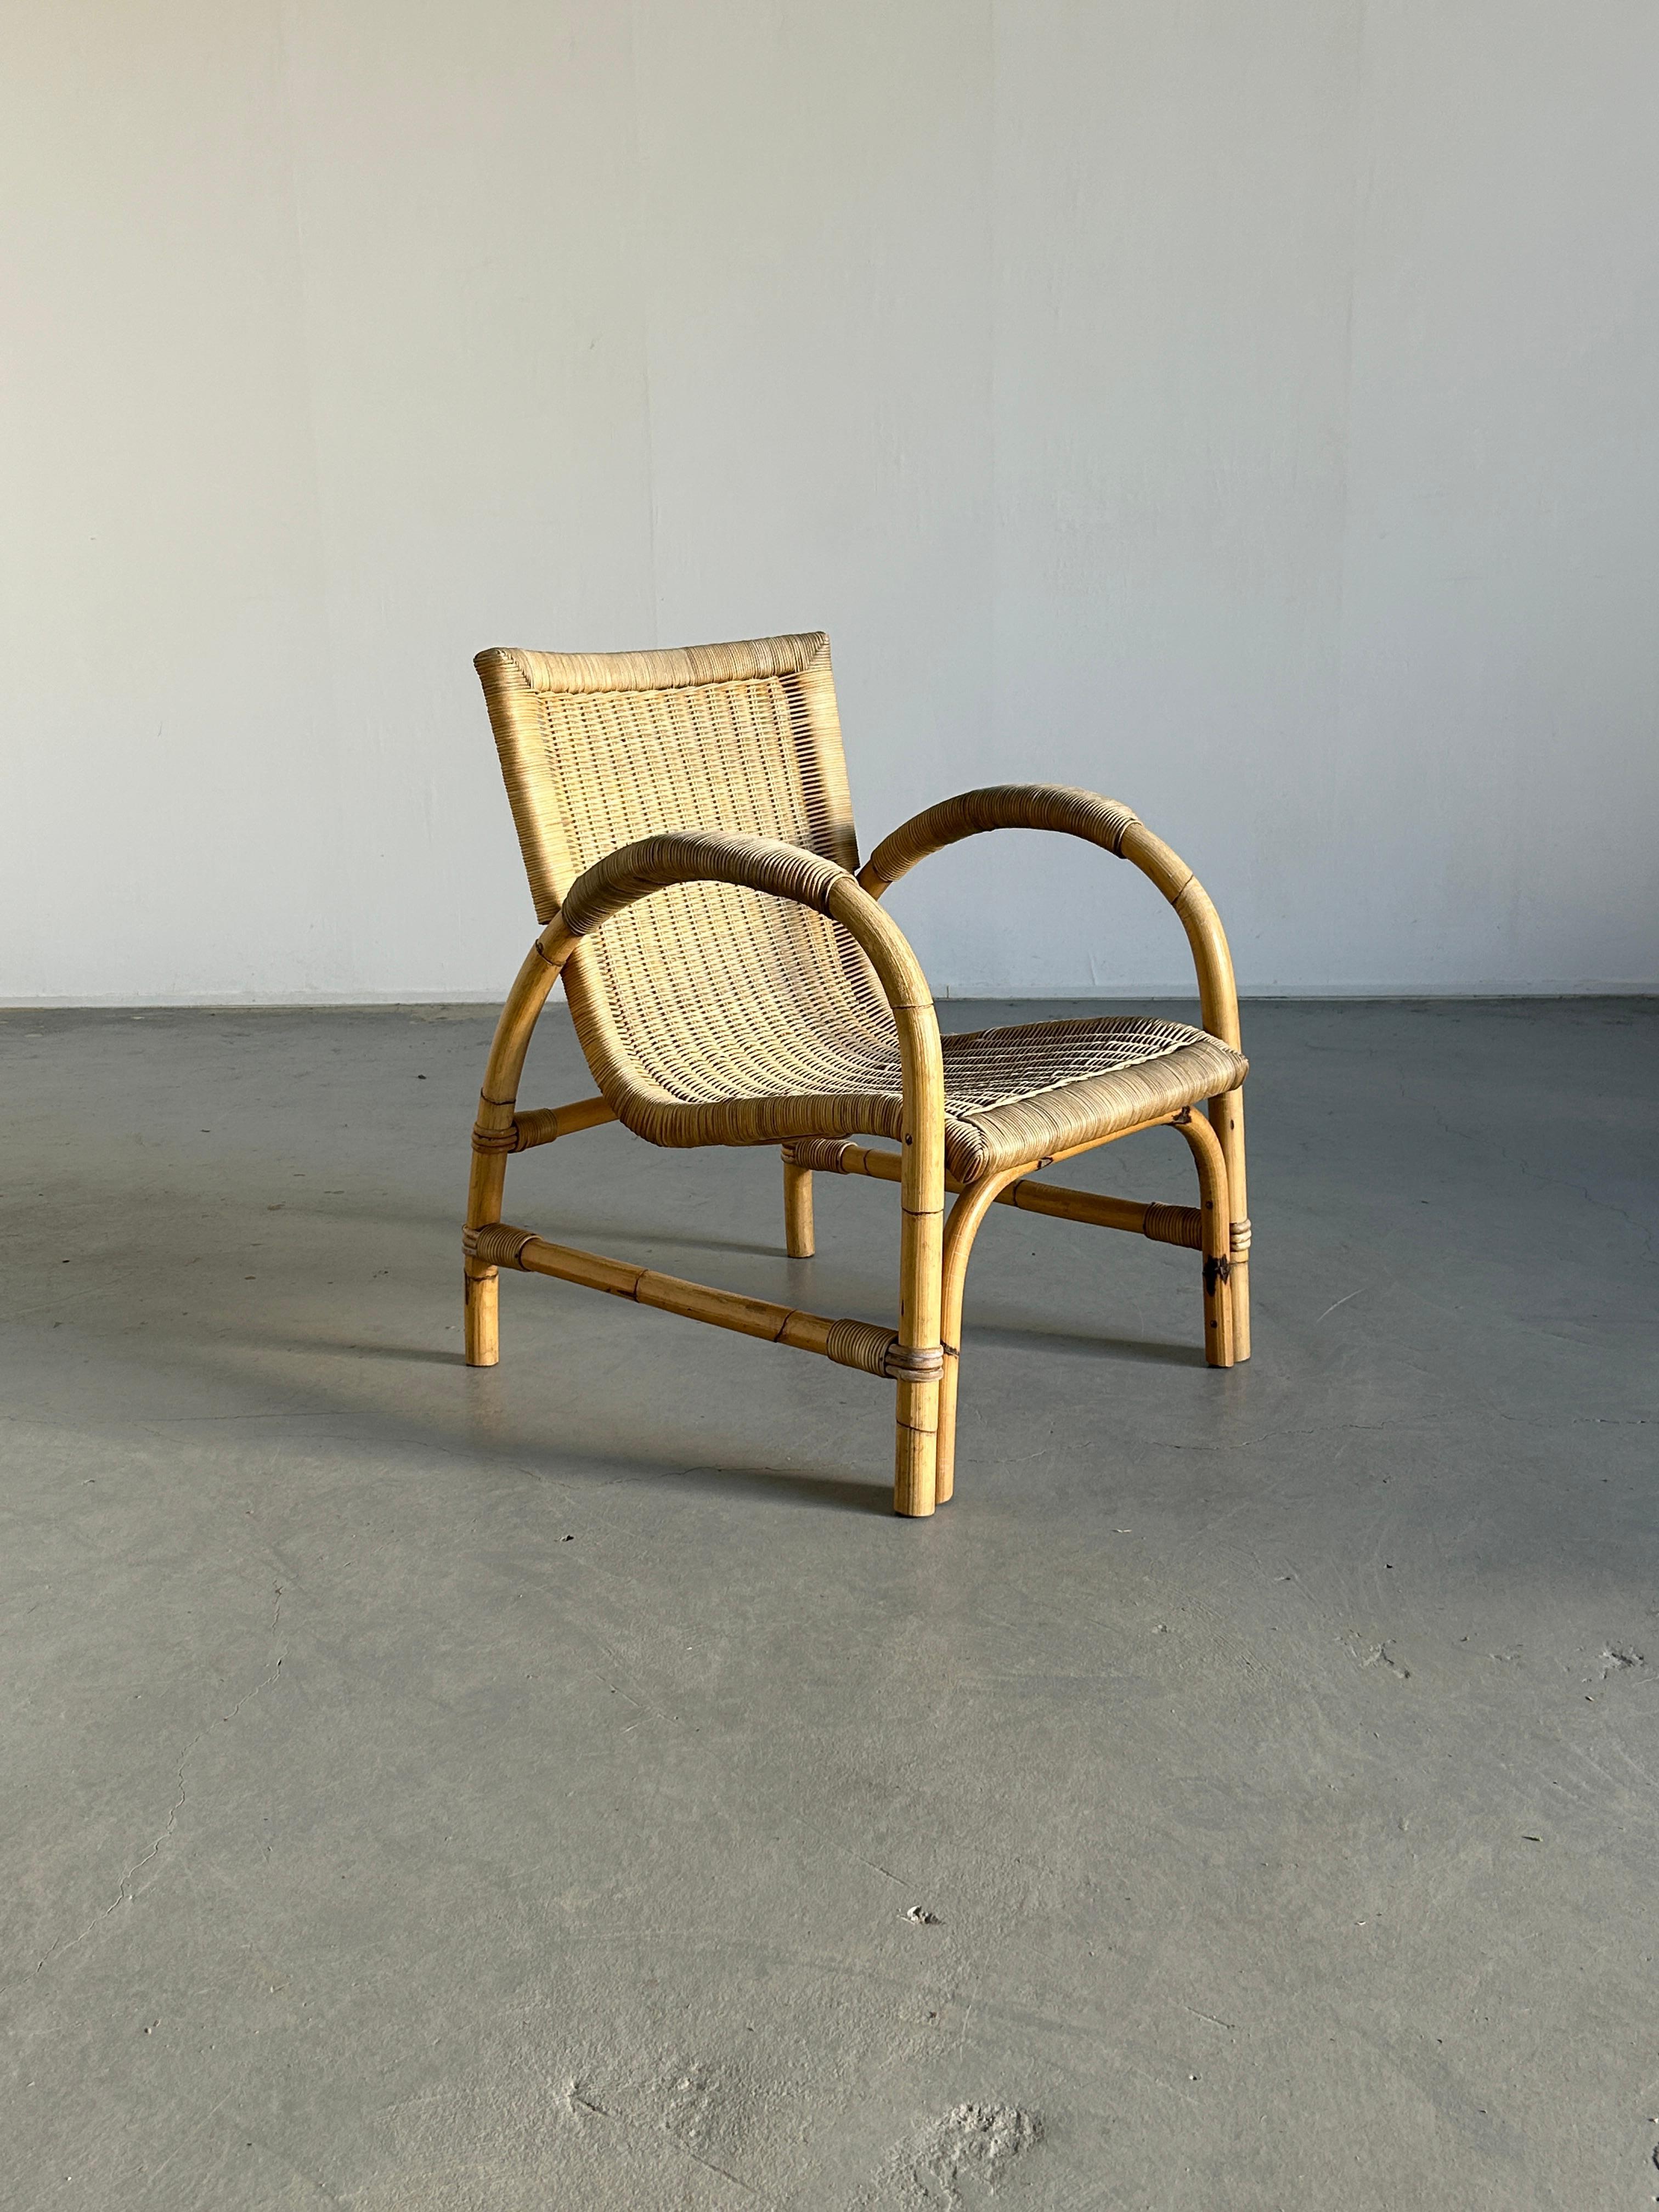 A beautiful collectible vintage lounge chair in rattan and bamboo, produced by Arco Schutzmarke, 1950s Germany.

Very good vintage condition with expected signs of age. No defects.

We try our best to accurately depict any imperfections on our